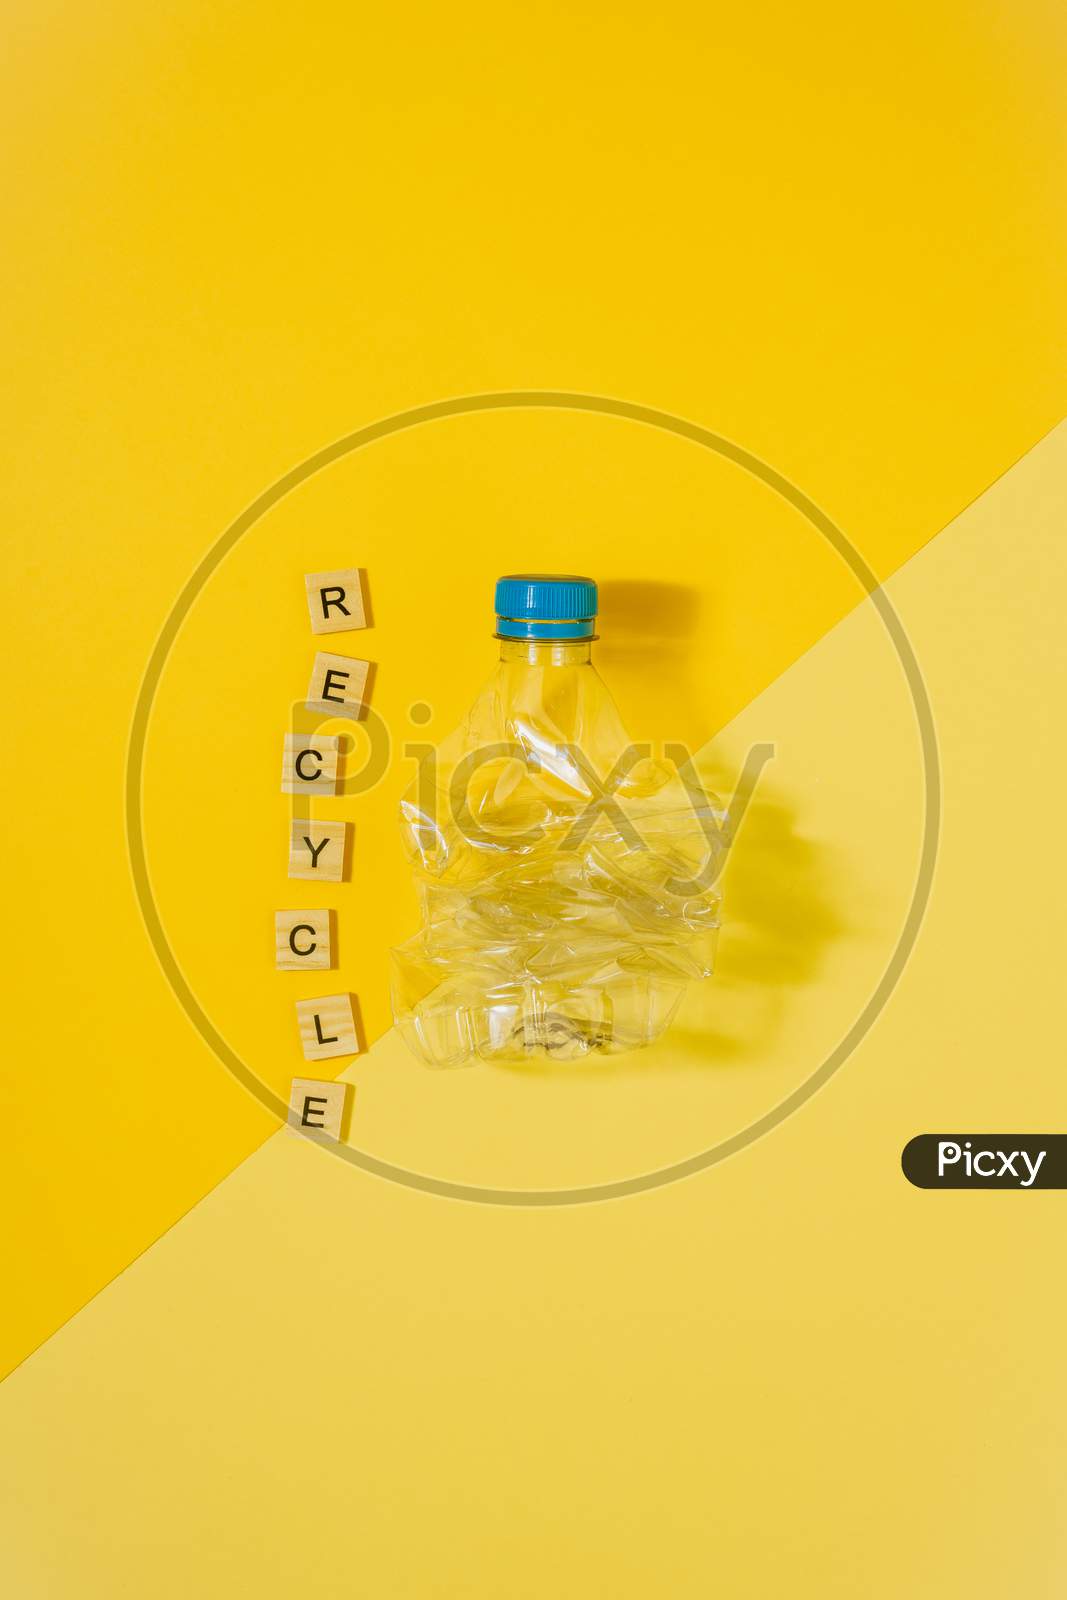 Transparent And Crushed Plastic Bottle With Blue Cap On A Yellow Background And The Word Recycle. Recycling And Environment Concept.